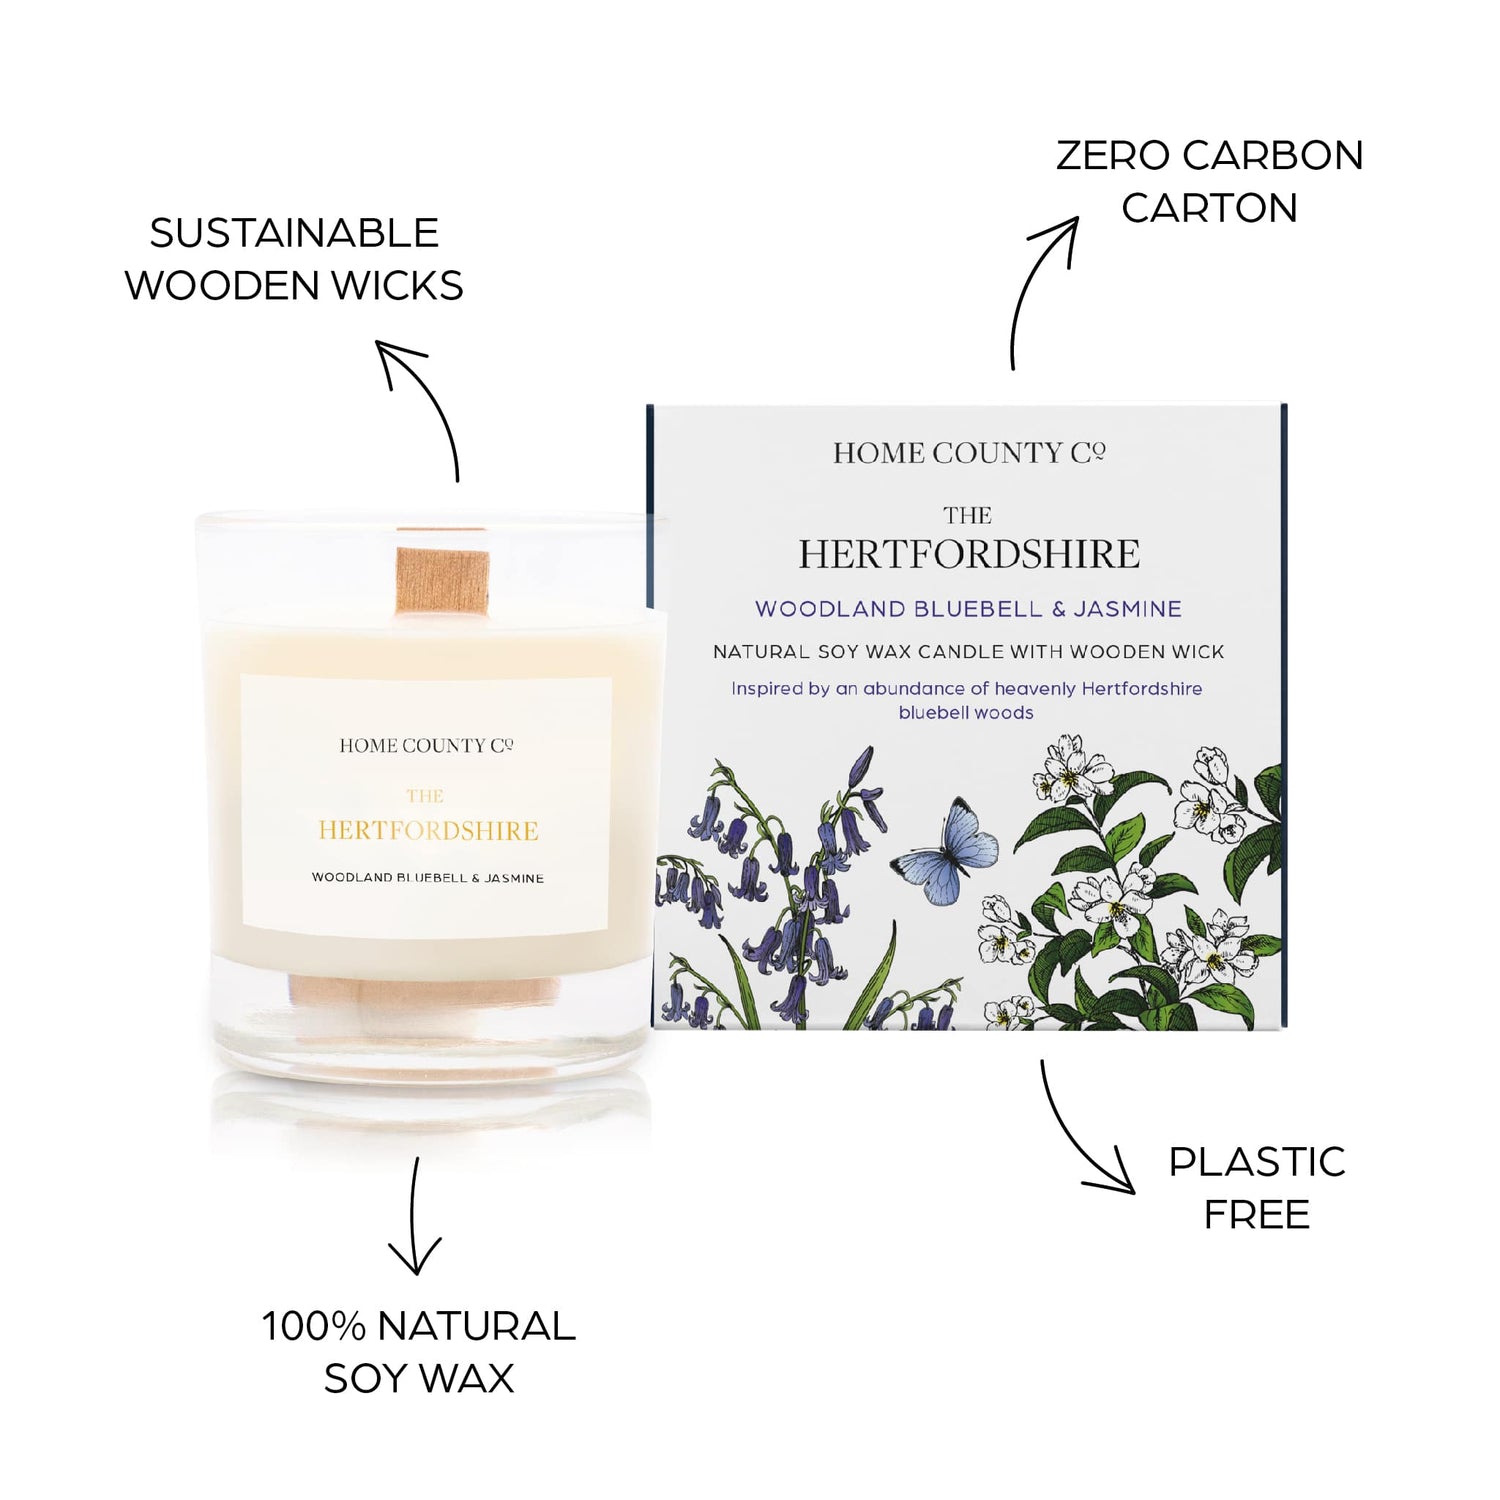 Sustainable candle credentials are shown around the bluebell scented candle image - sustainable wooden wicks, zero carbon carton, 100% natural soy wax, plastic free